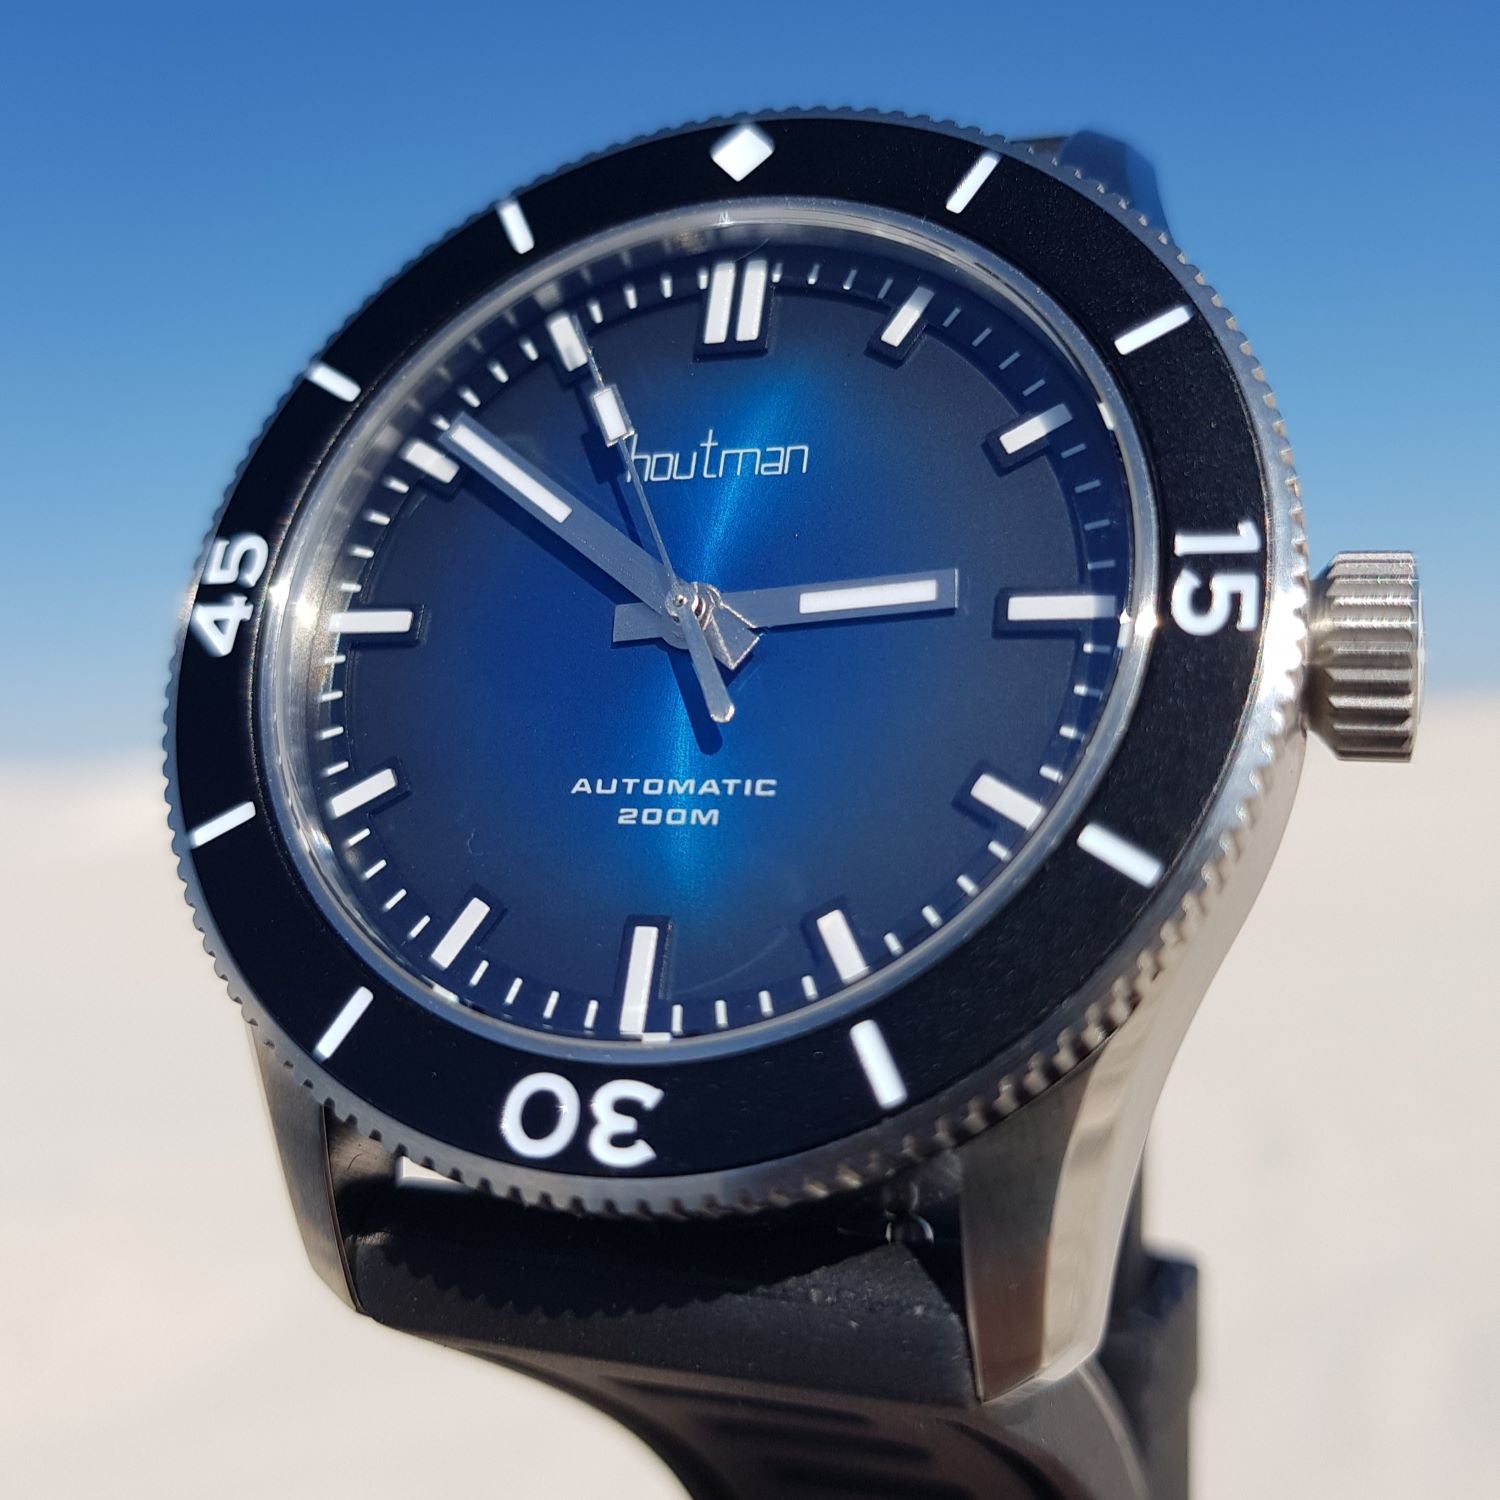 Australian dive watch with blue dial